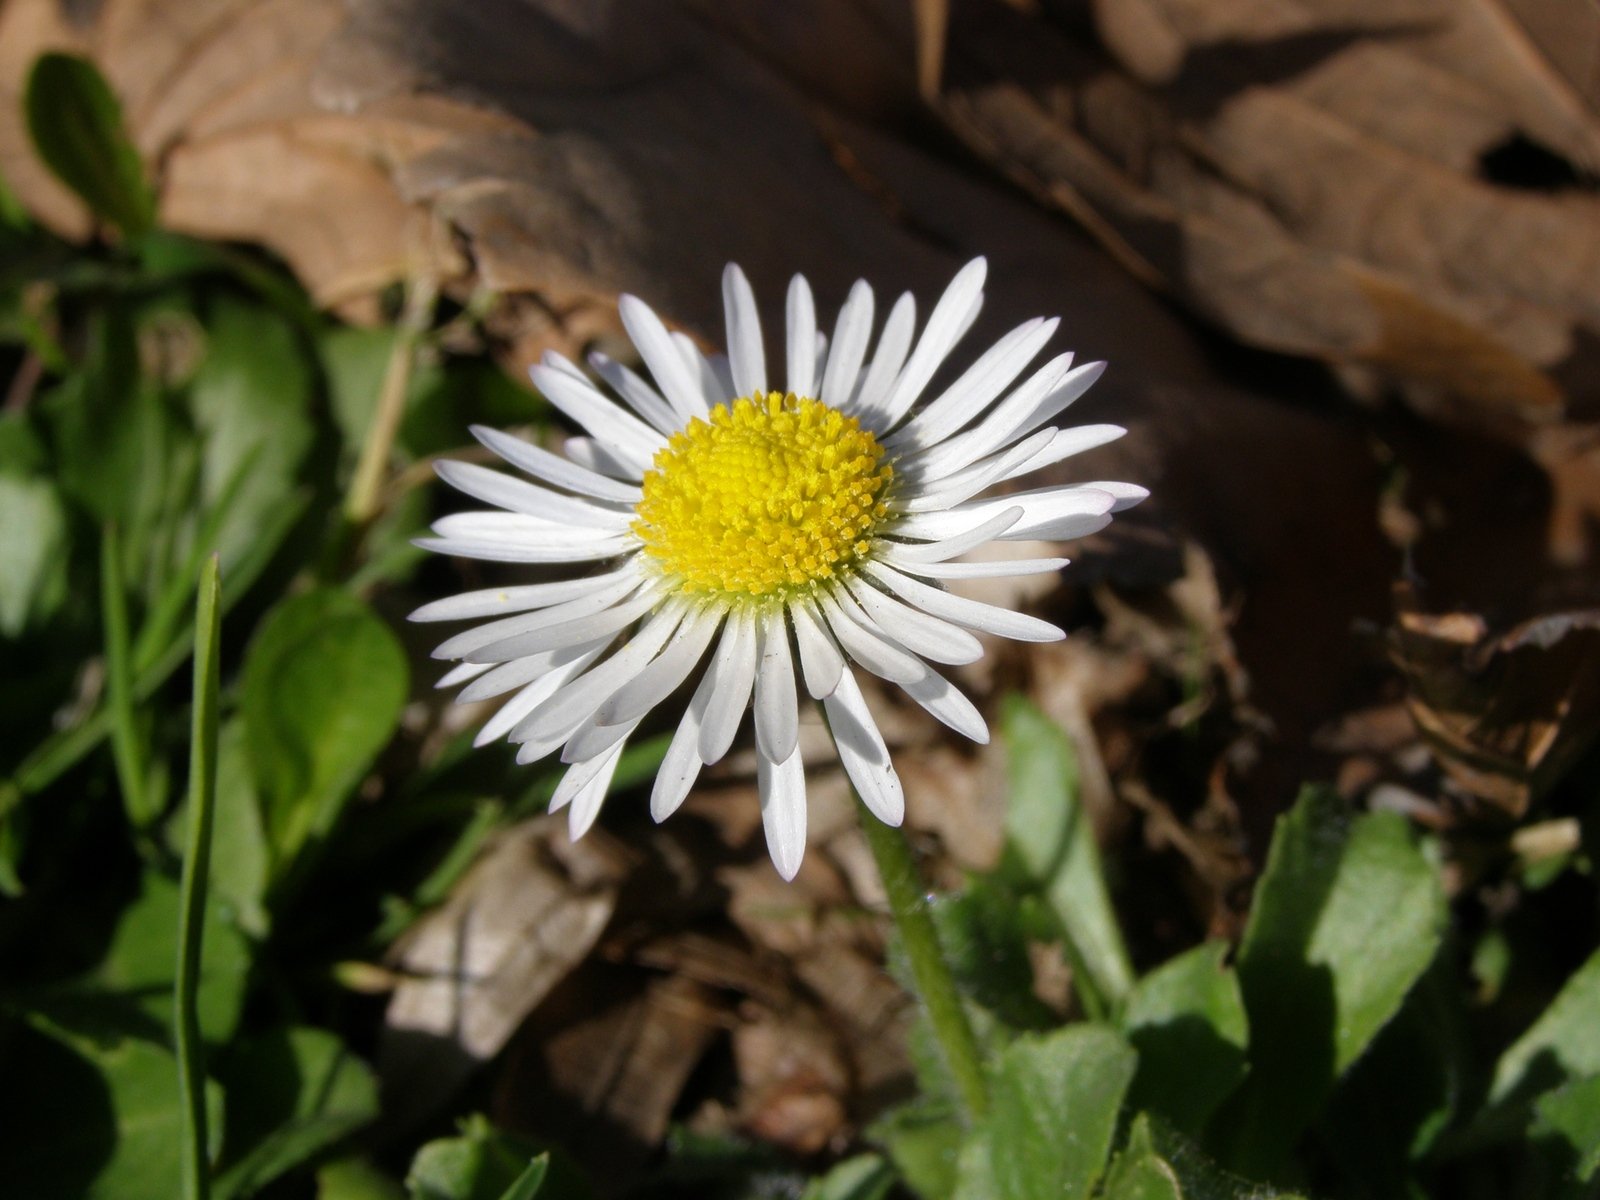 a lone white daisy flower with yellow center